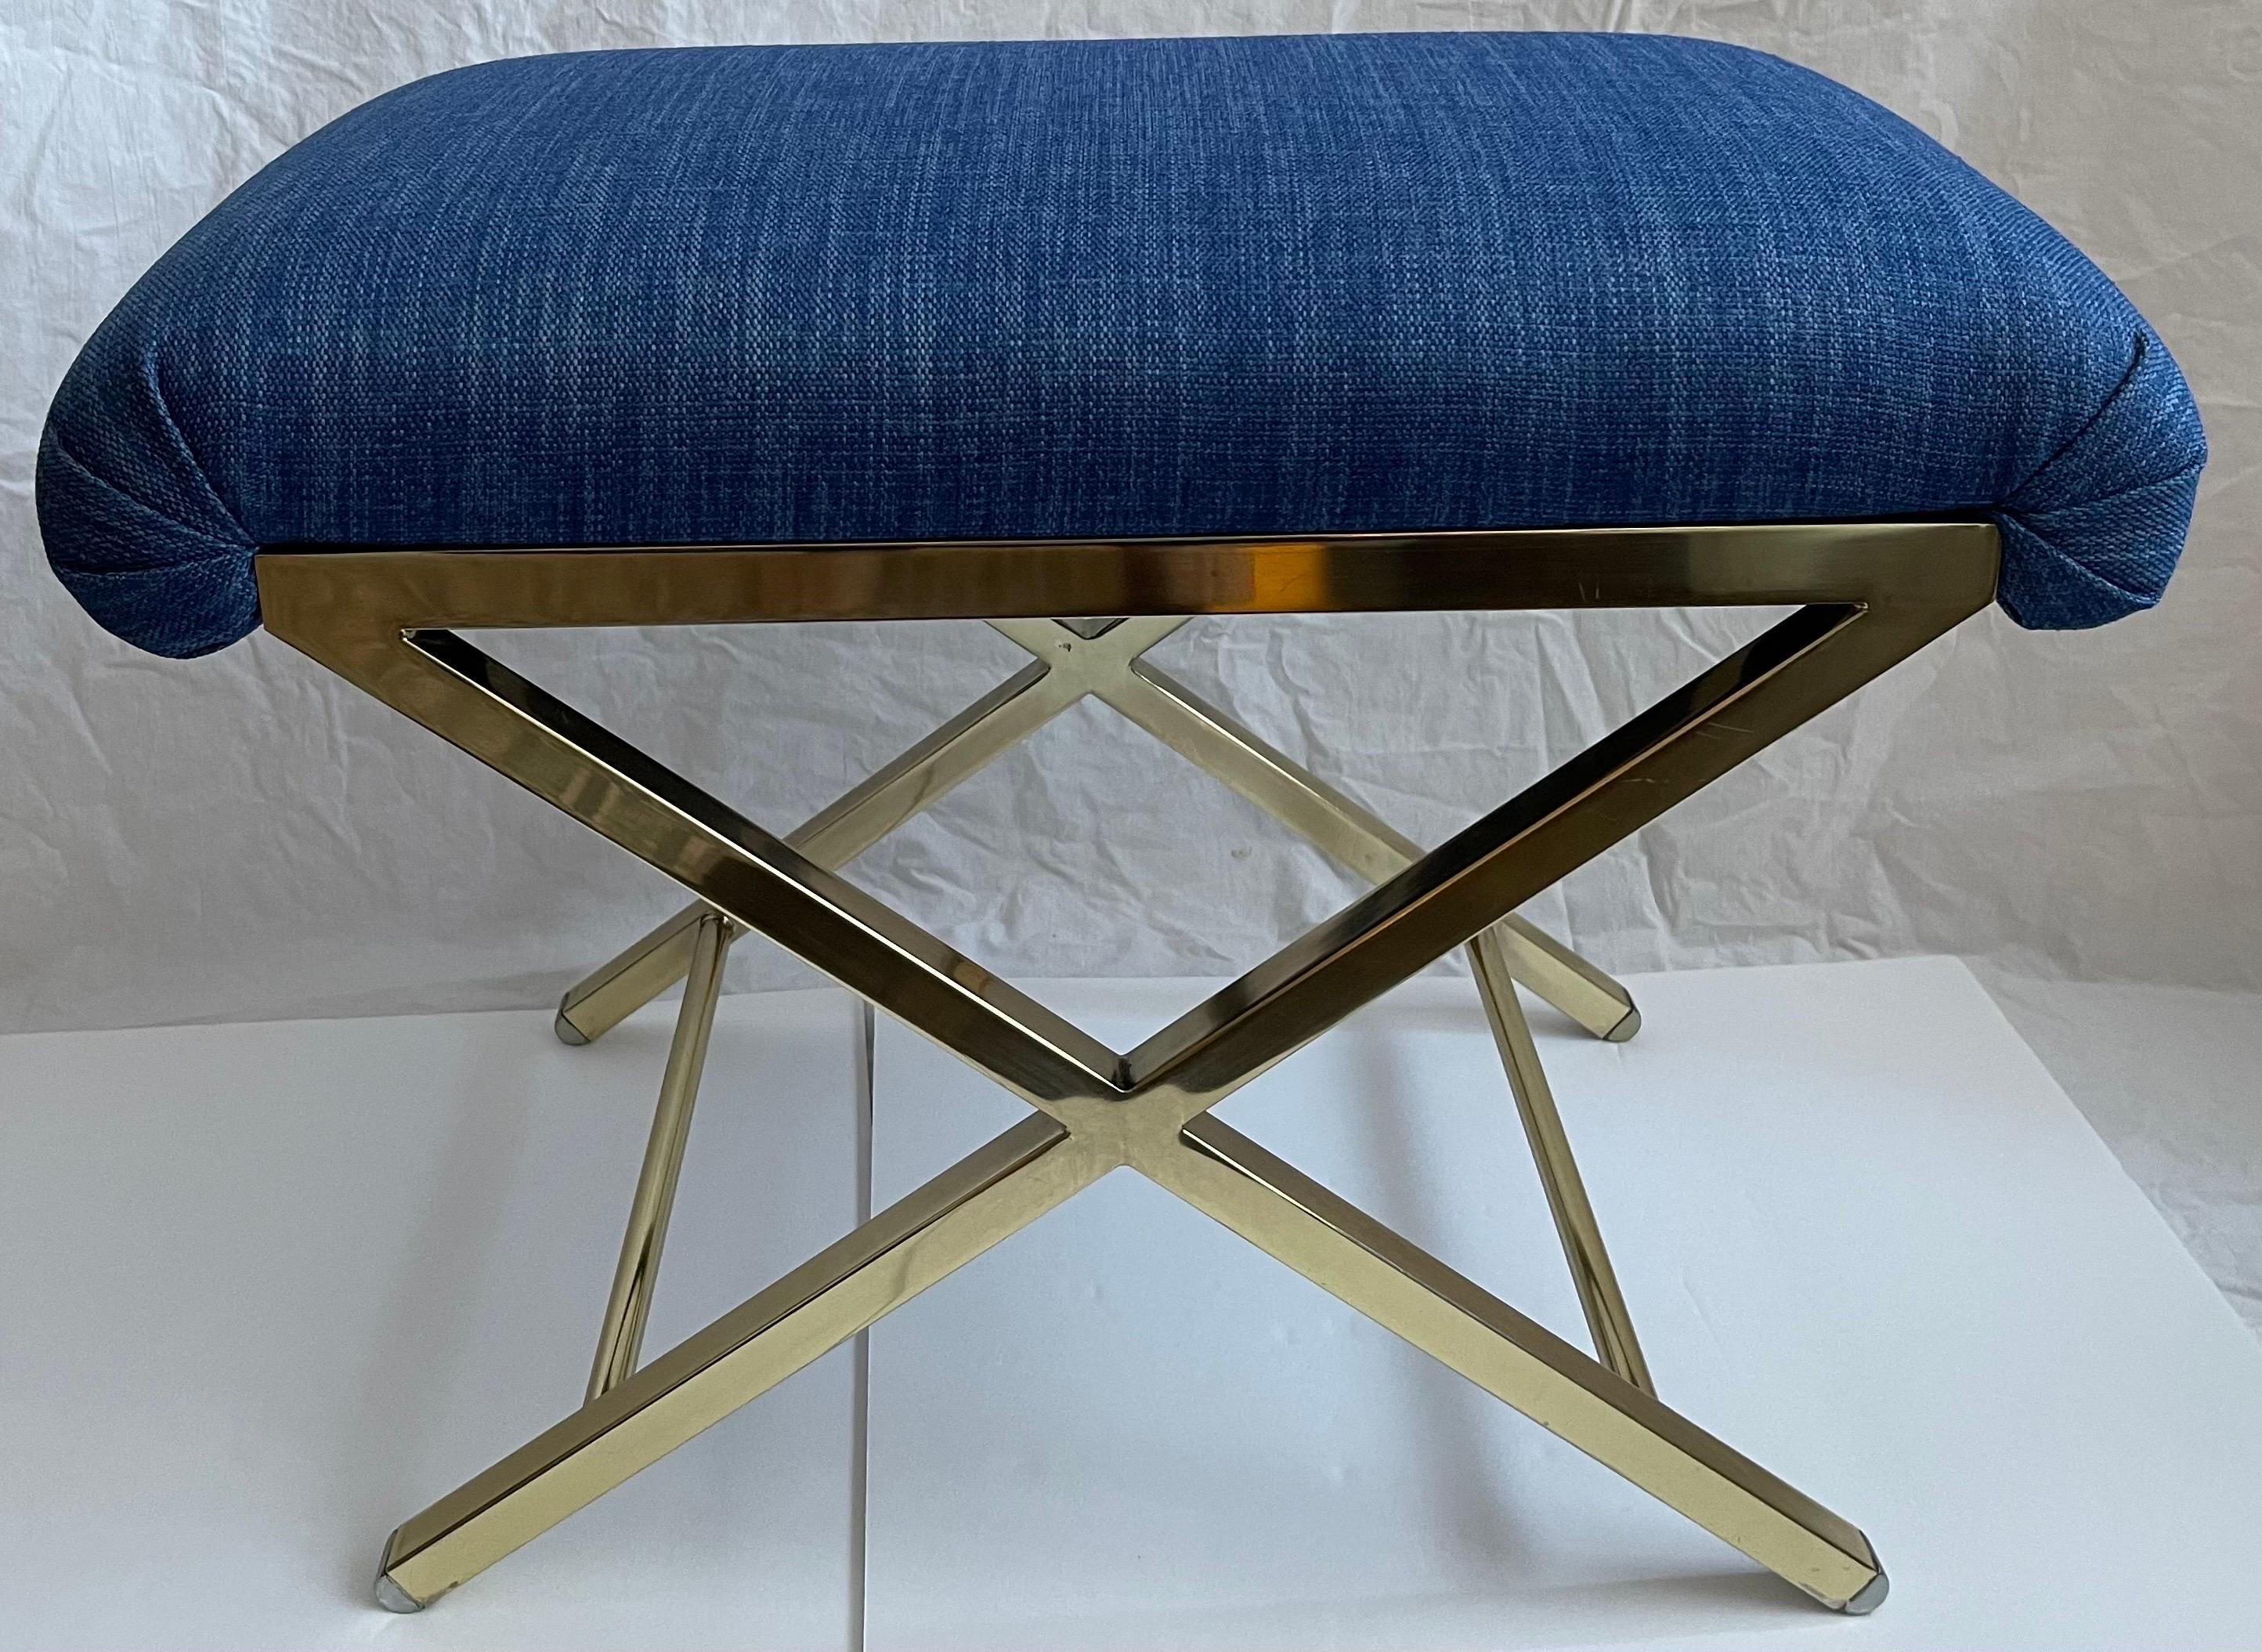 1970s Polished brass X-bench. Newly upholstered in Kravet blue woven performance fabric.
Performance fabric makes it suitable for high traffic areas.
No makers mark or brand stamp. The bench is heavy and well made.